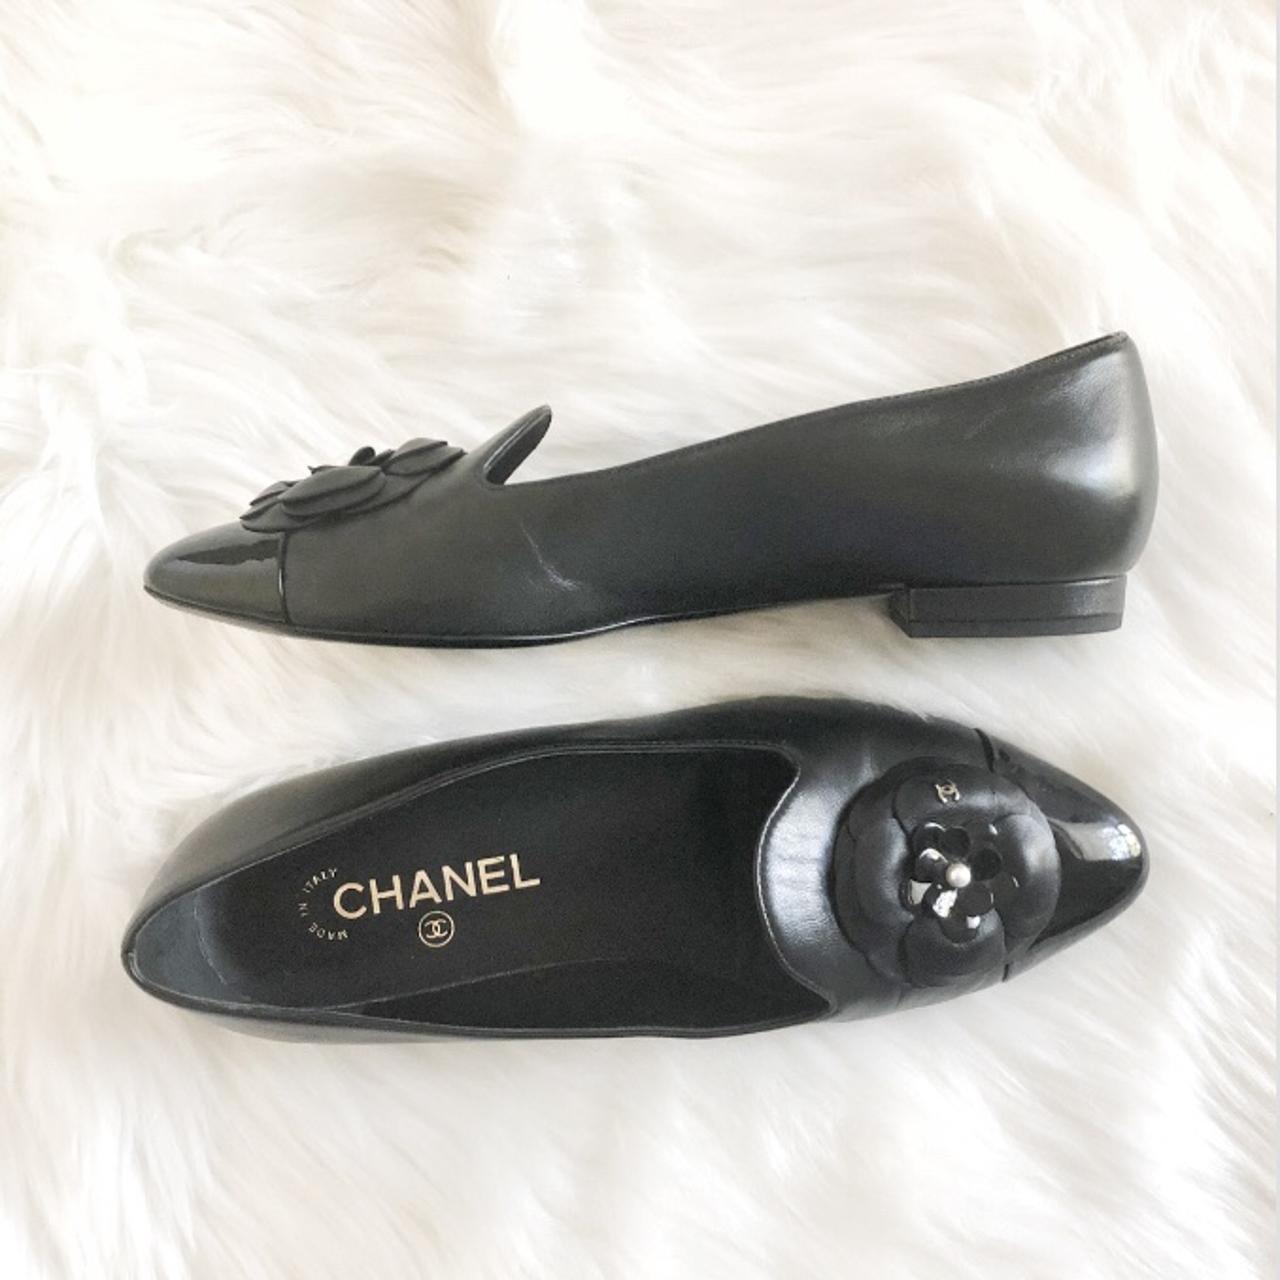 Chanel Brand New Classic Champagne Glitter Camellia Flower Leather Pumps   LAR Vintage